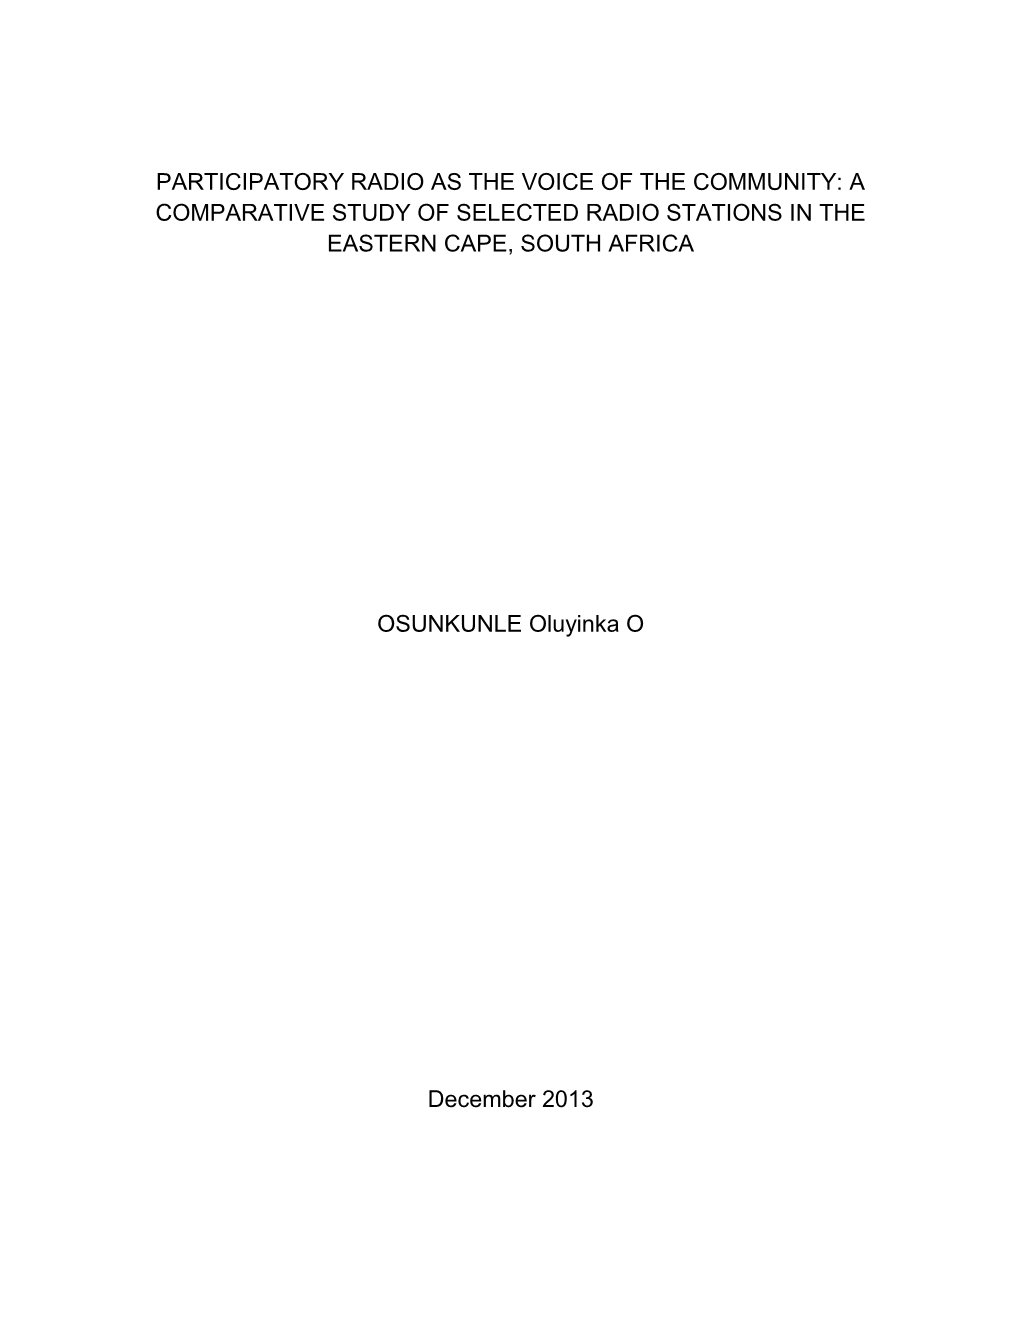 A Comparative Study of Selected Radio Stations in the Eastern Cape, South Africa